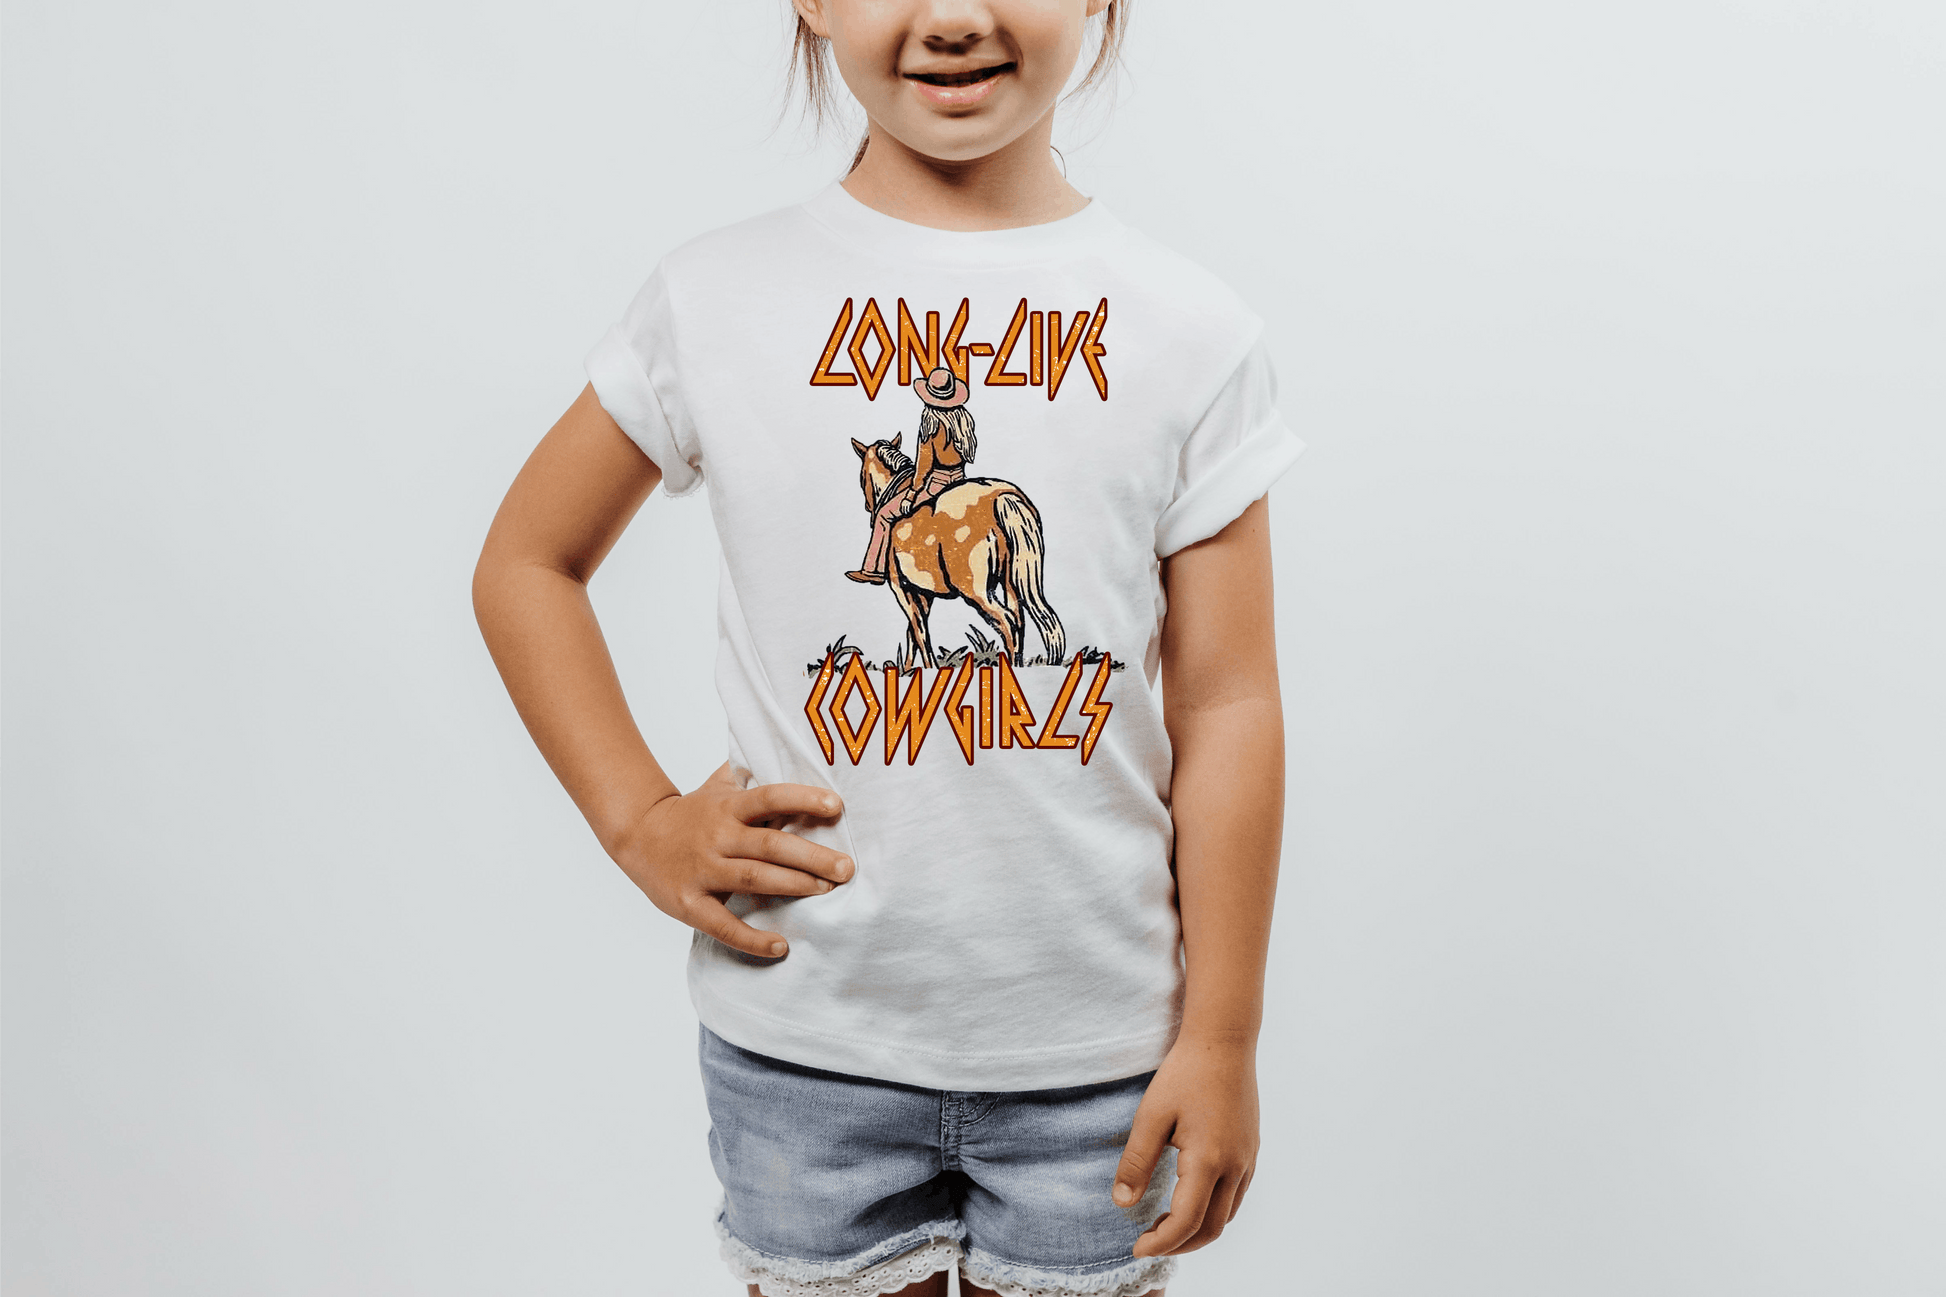 Long Live Cowgirls Youth   Clear Screen Print Hot  